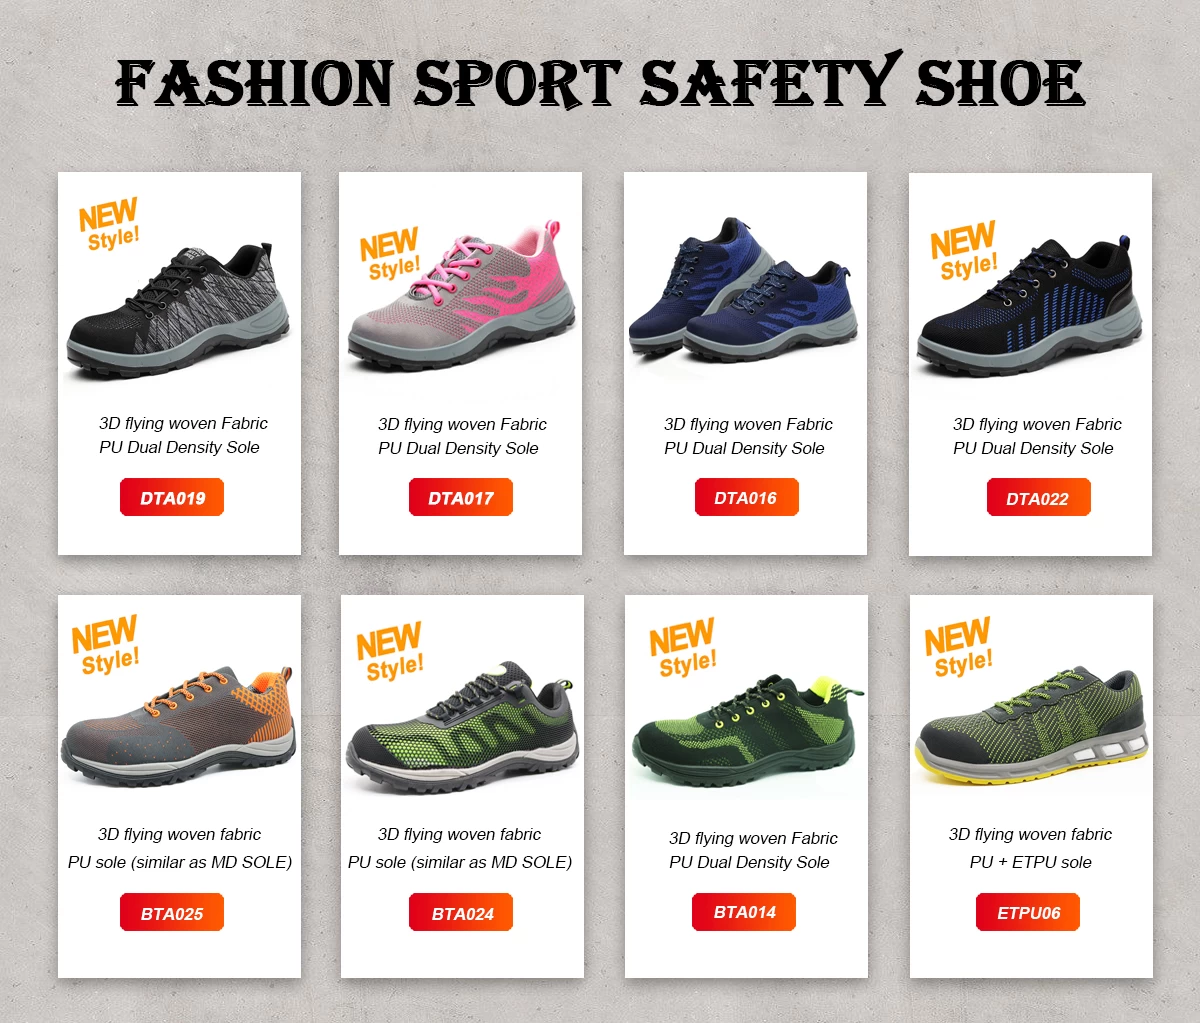 China Fashion sport safety shoes manufacturer